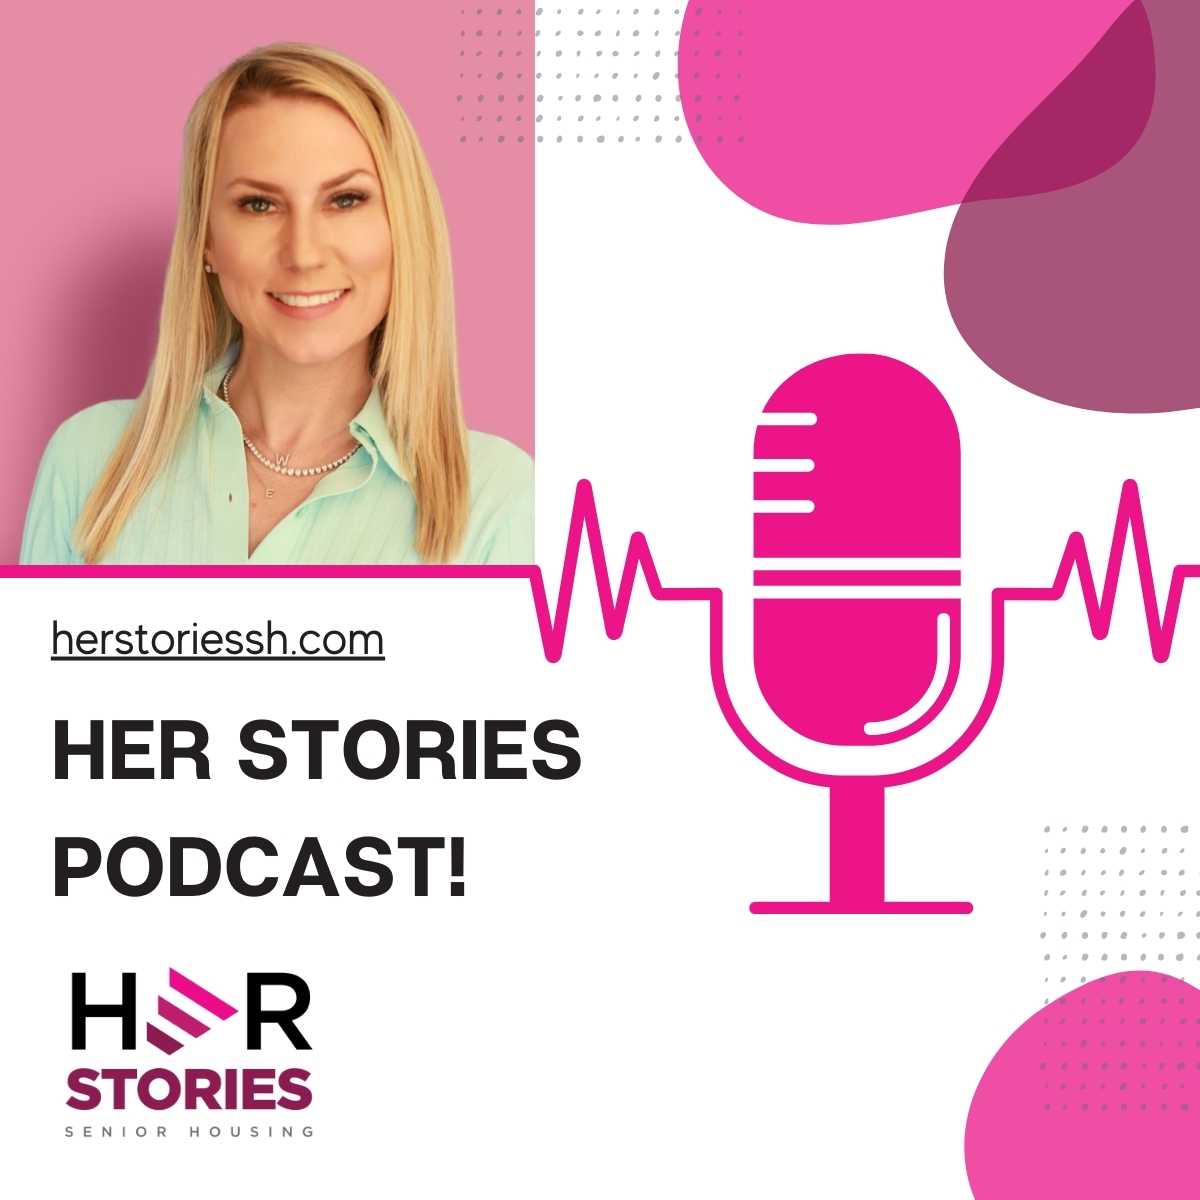 Her Stories Podcast